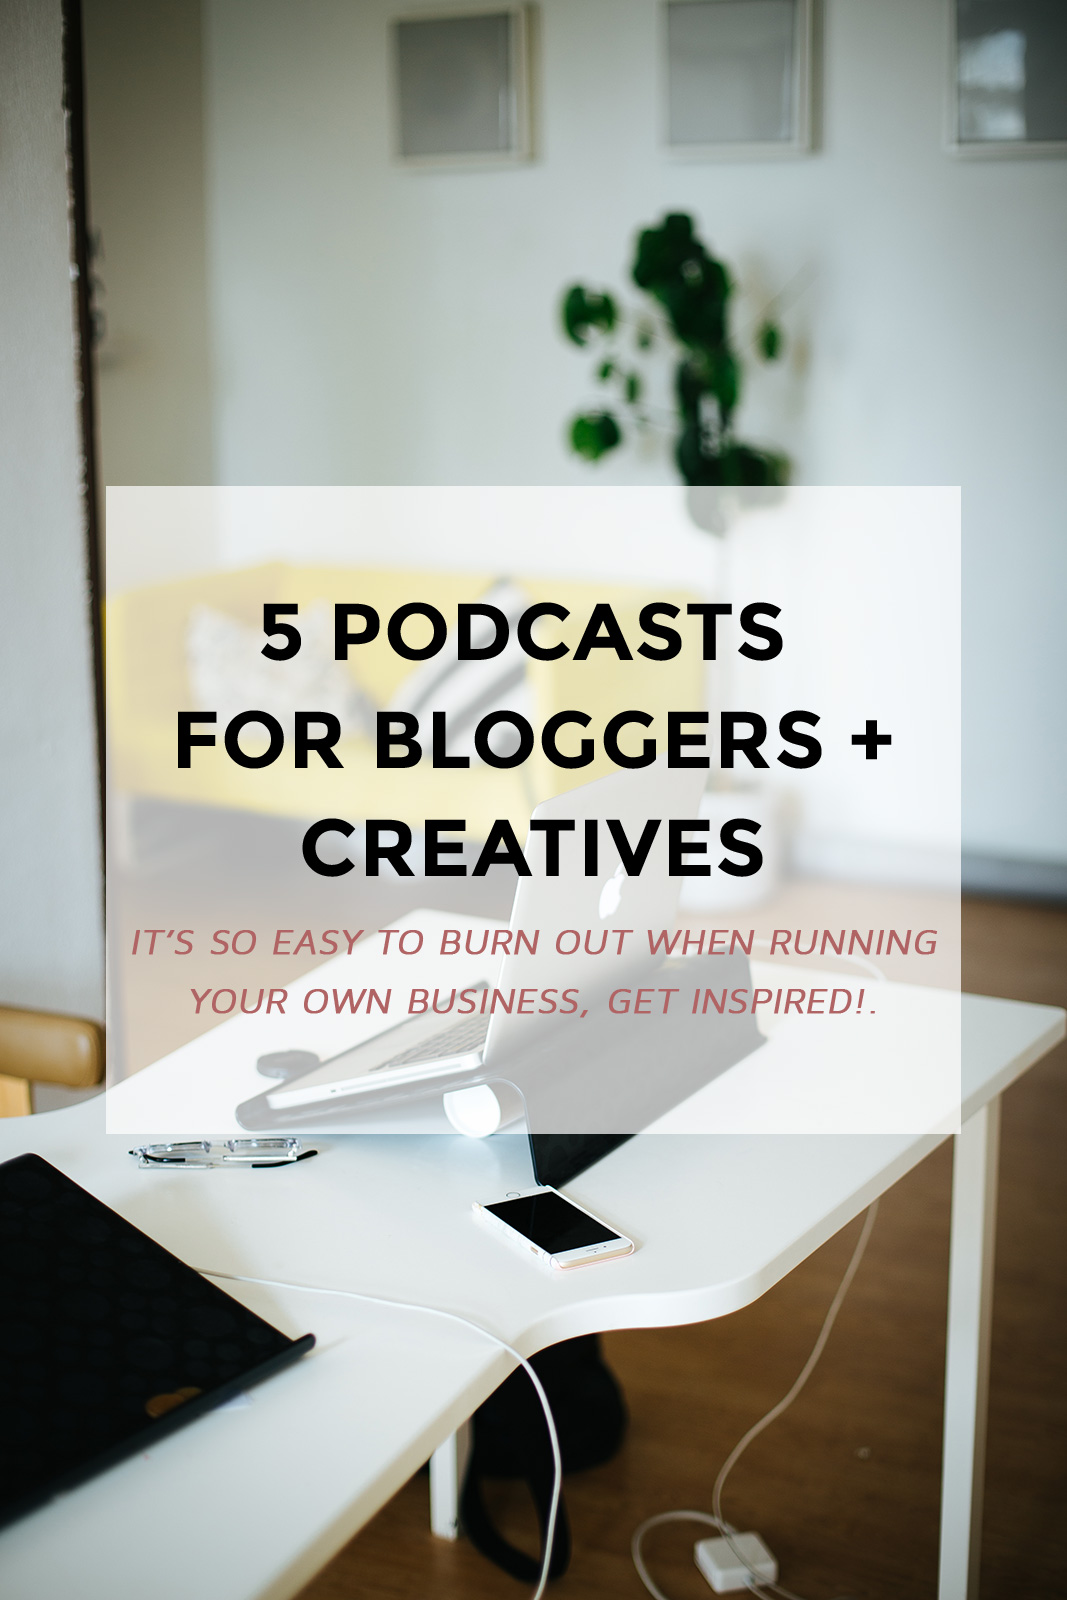 It's so easy to burn out when running your own business. On the days when I feel particularly down, I'd look for something inspiration to watch or listen. Hearing other people's stories really helps me to get back on track & keep going. Podcasting has recently become a wildly popular new form of media and I'm so excited to be completely addicted to this trend. Here are some of the best podcasts I follow religiously and every blogger + creative should too. (podcasts for bloggers, blogging inspiration, blogging tips)